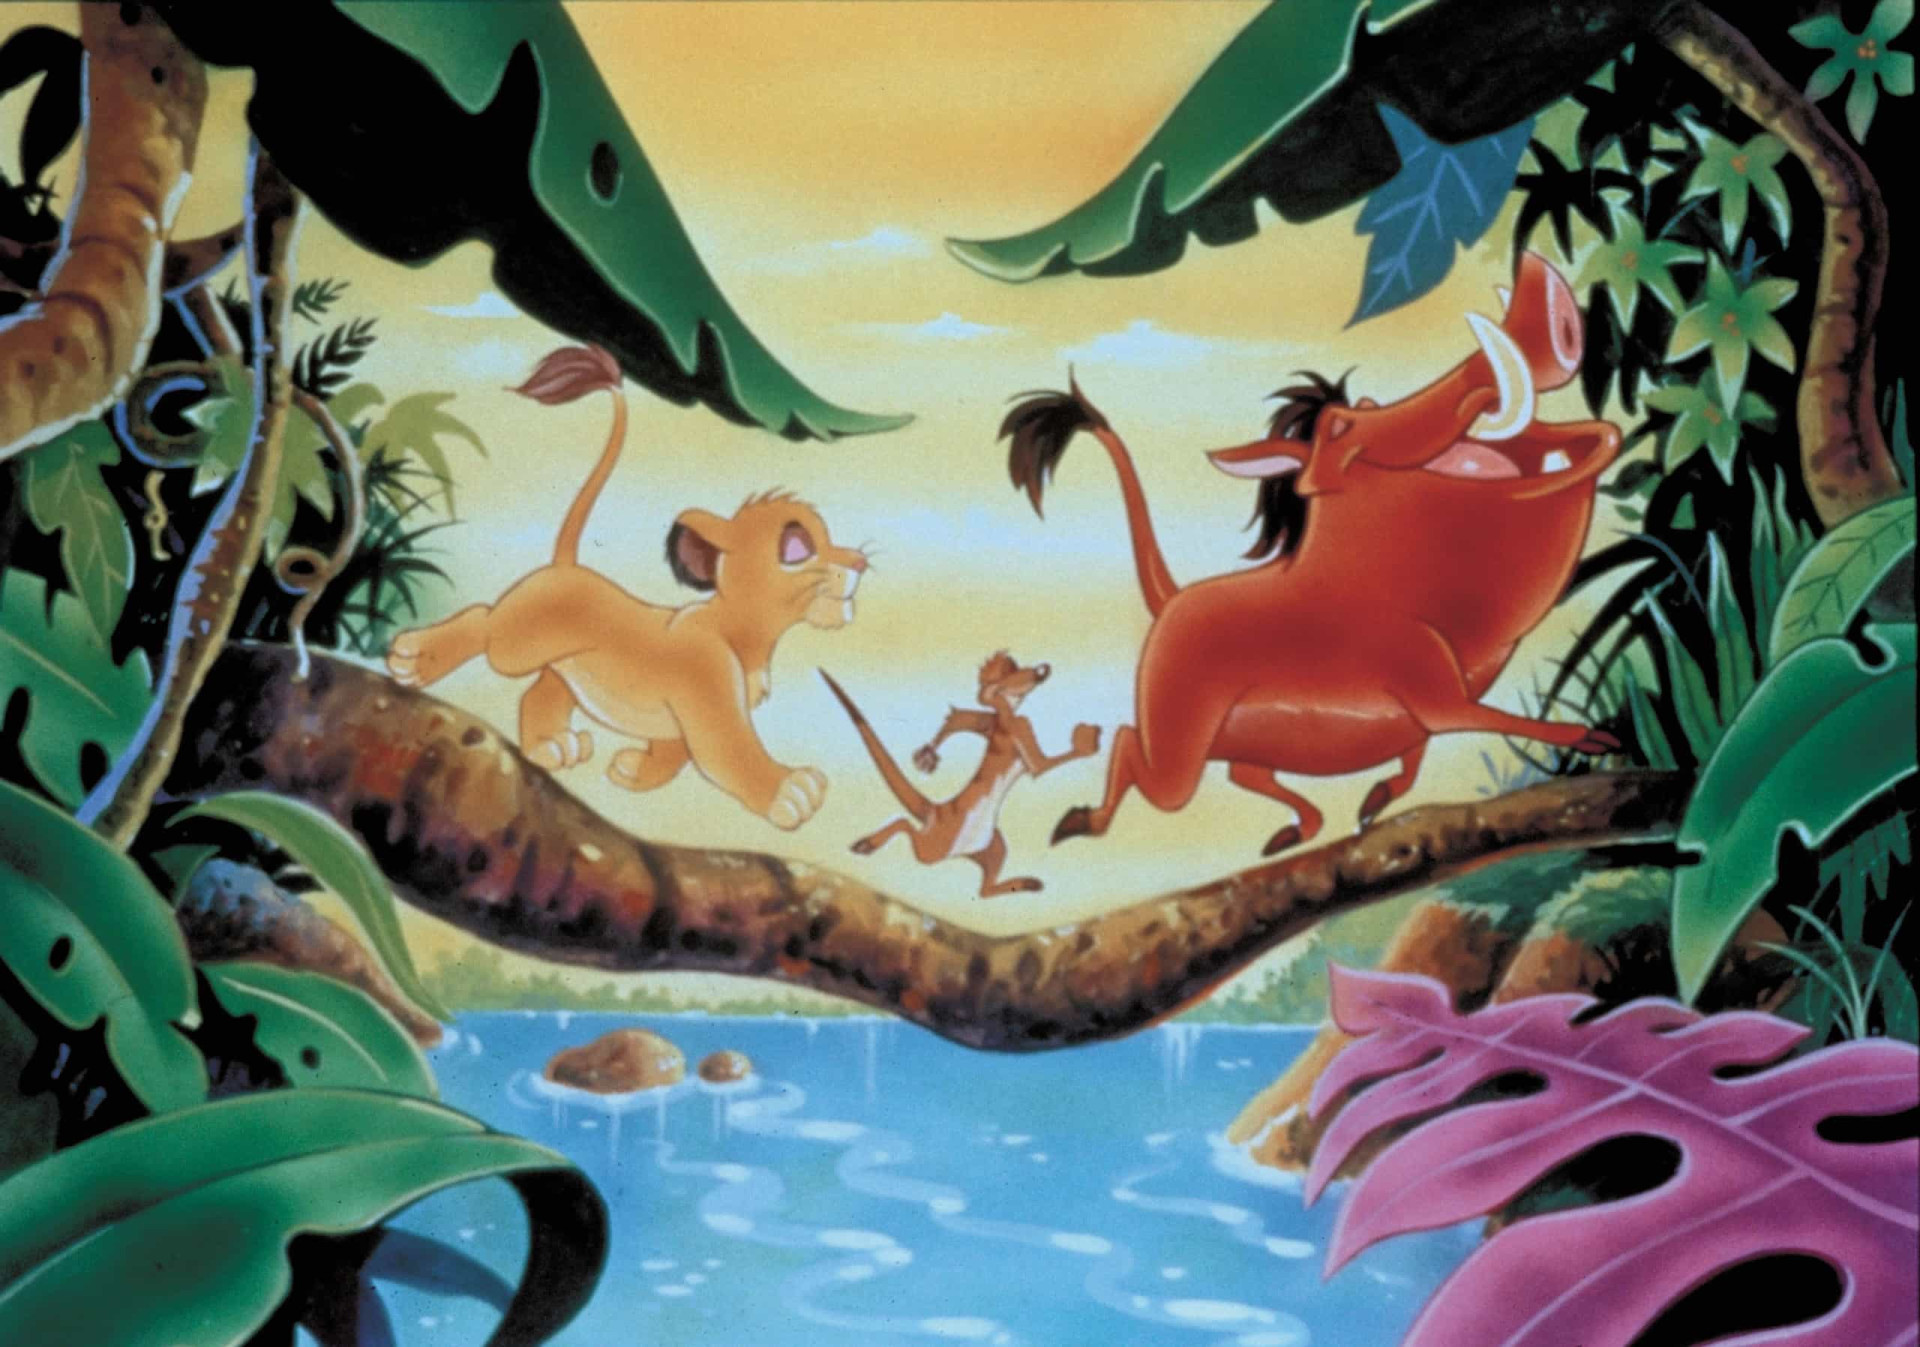 <p>'The Lion King' (1994) has one of the most amazing soundtracks. One of the songs that makes you forget about your problems and feel good is 'Hakuna Matata,' which actually means "no worries" in Swahili.</p><p>You may also like:<a href="https://www.starsinsider.com/n/168788?utm_source=msn.com&utm_medium=display&utm_campaign=referral_description&utm_content=498954v1en-us"> 30 beautiful and single Hollywood celebrities</a></p>